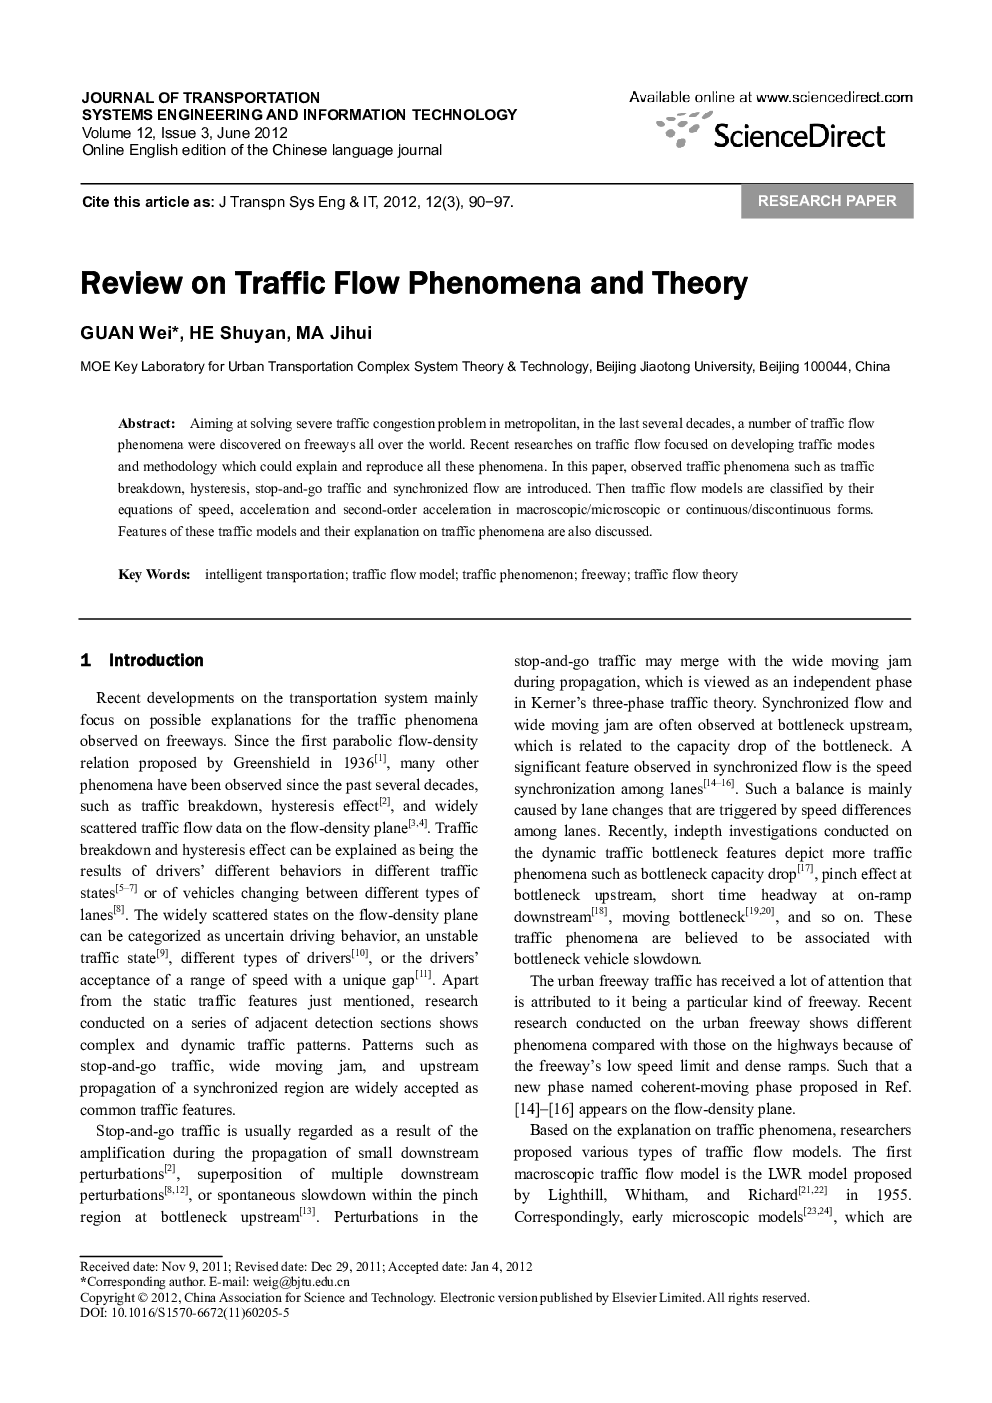 Review on Traffic Flow Phenomena and Theory